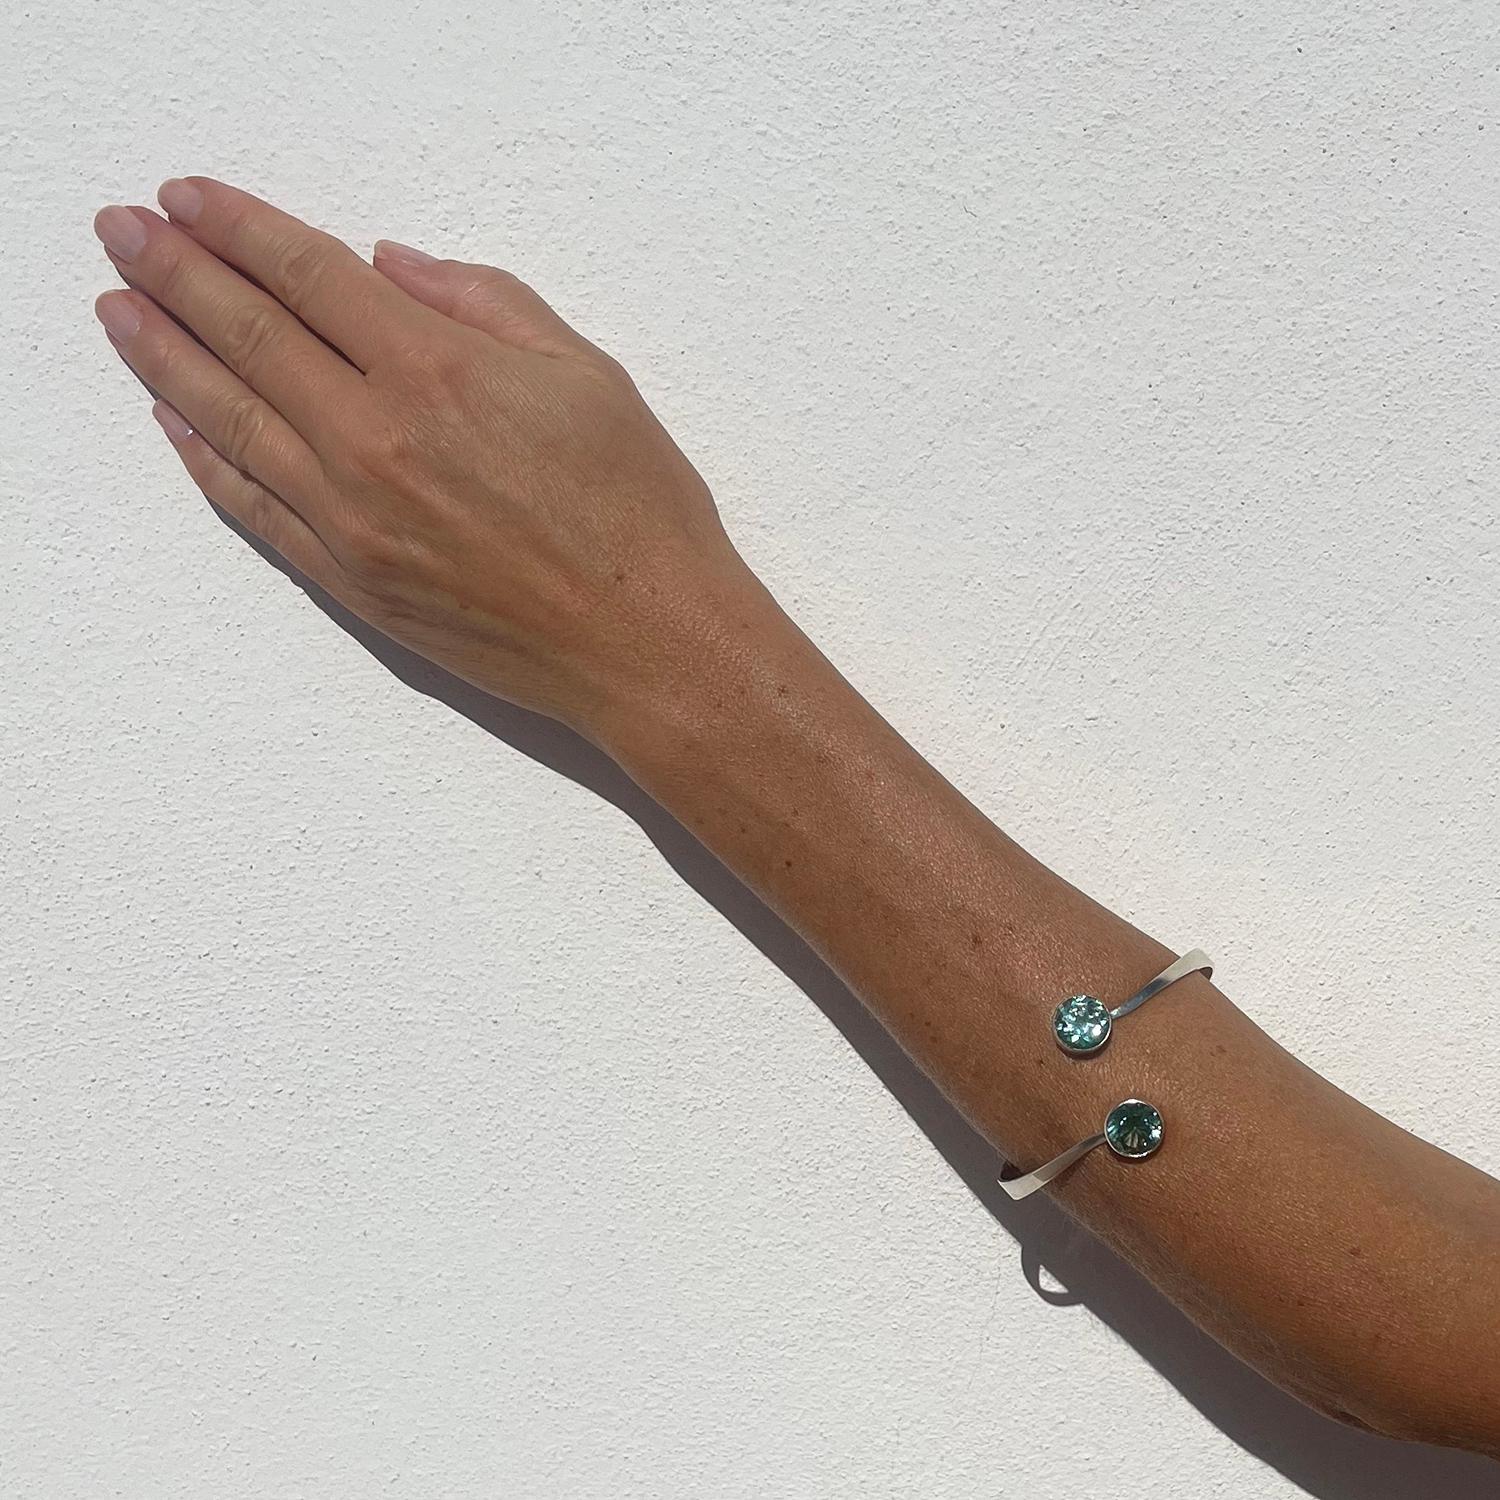 This silver cuff bracelet is adorned with two synthetic spinels. The spinels have an intensive turquoise colour and are typical eye-catchers.

The cuff bracelet has an oriental style. It is stretchy and is meant to be worn on the forearm.

It will